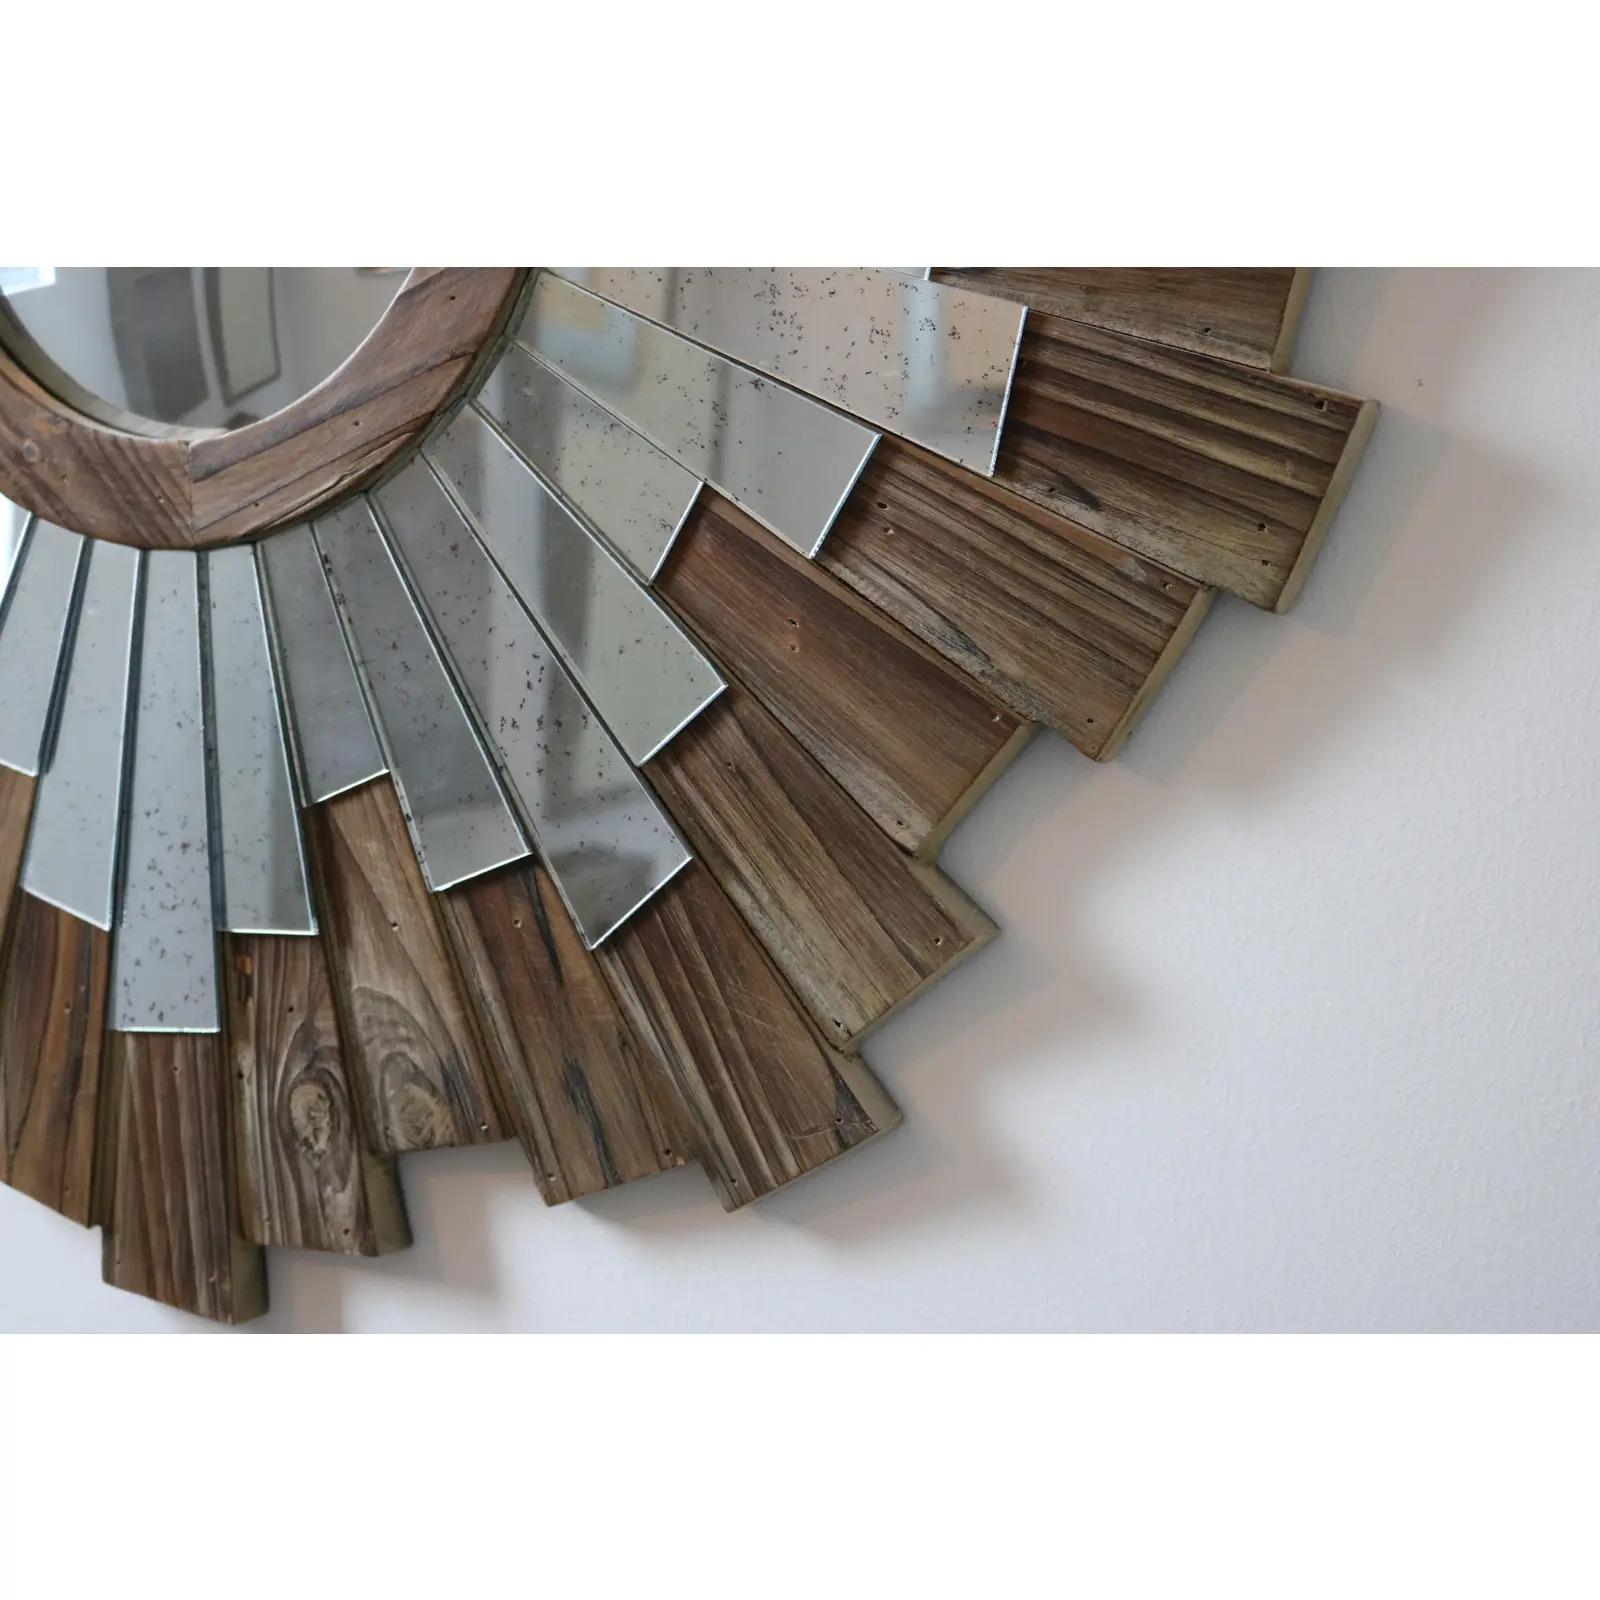 Sunburst Mirror with Driftwood Rays For Sale 2